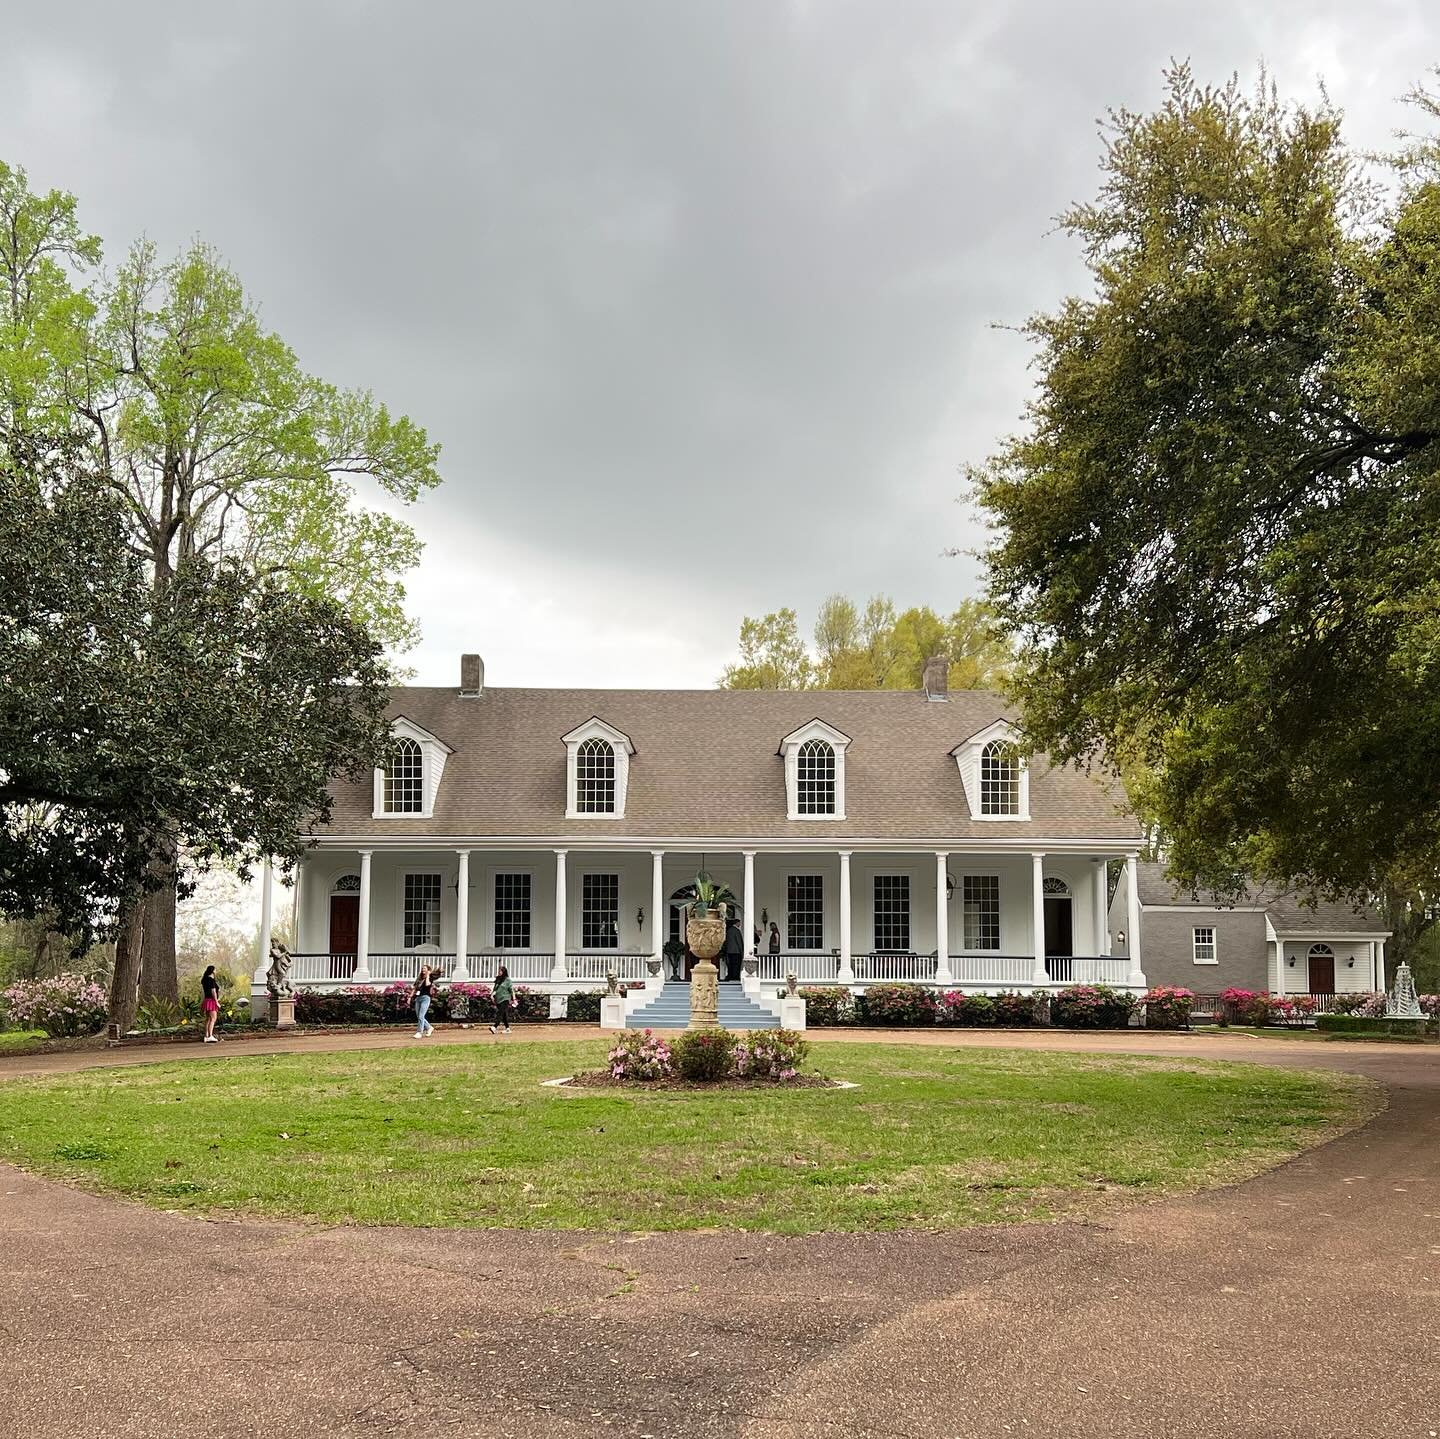 Day 3 exploring homes in Natchez - first official day with the ORN crew! We got some major rain on this day (thunder audible on 8th pic slide) and we&rsquo;re stuck on a huge porch with gorgeous iron work! Despite the wet, it was a lovely day explori